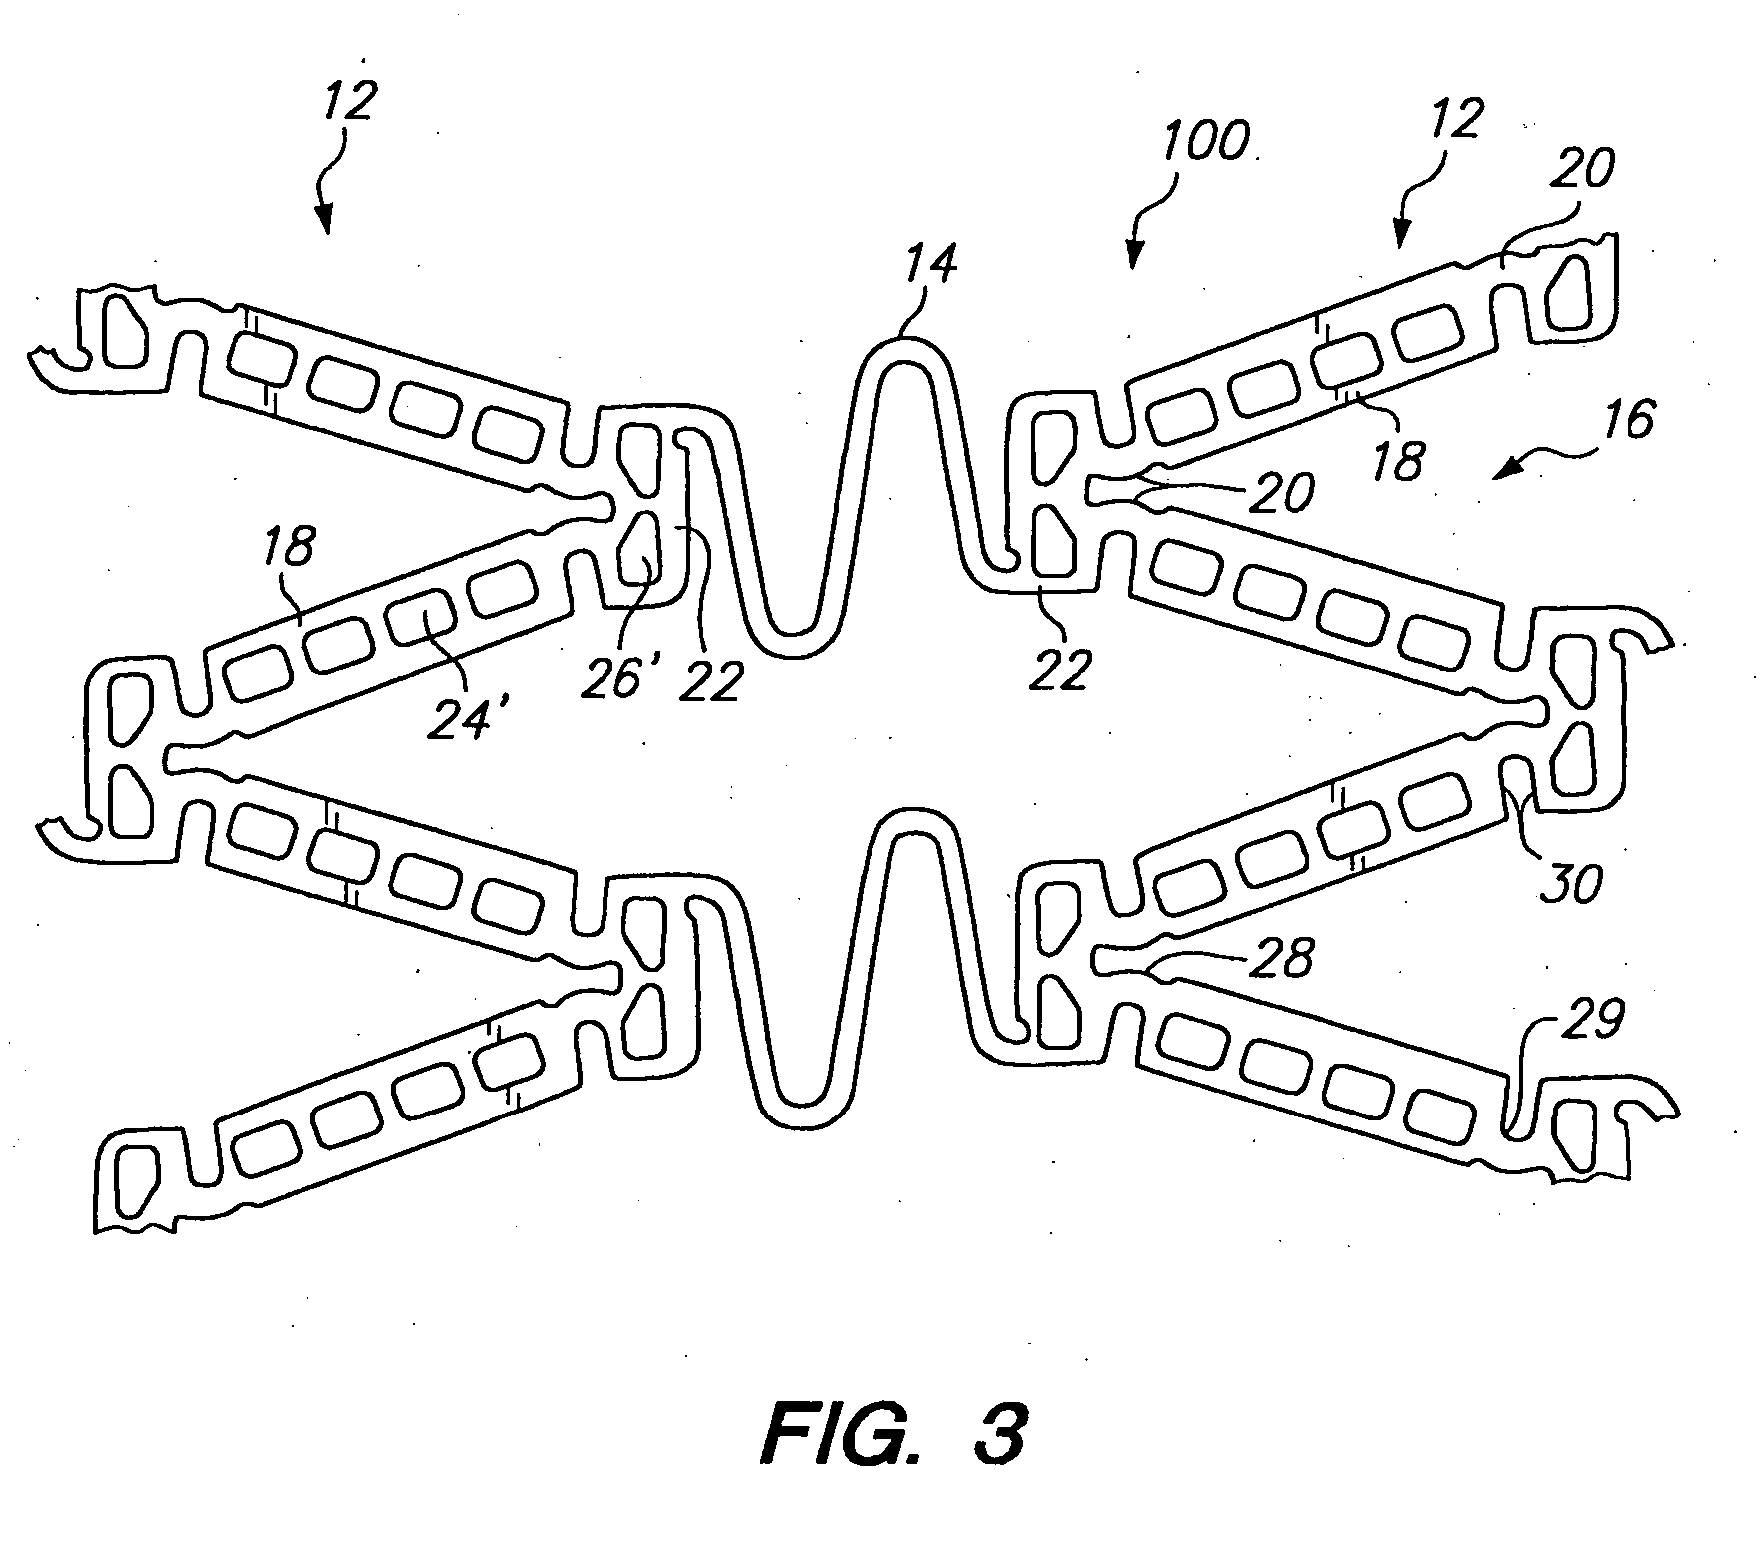 Expandable medical device for delivery of beneficial agent